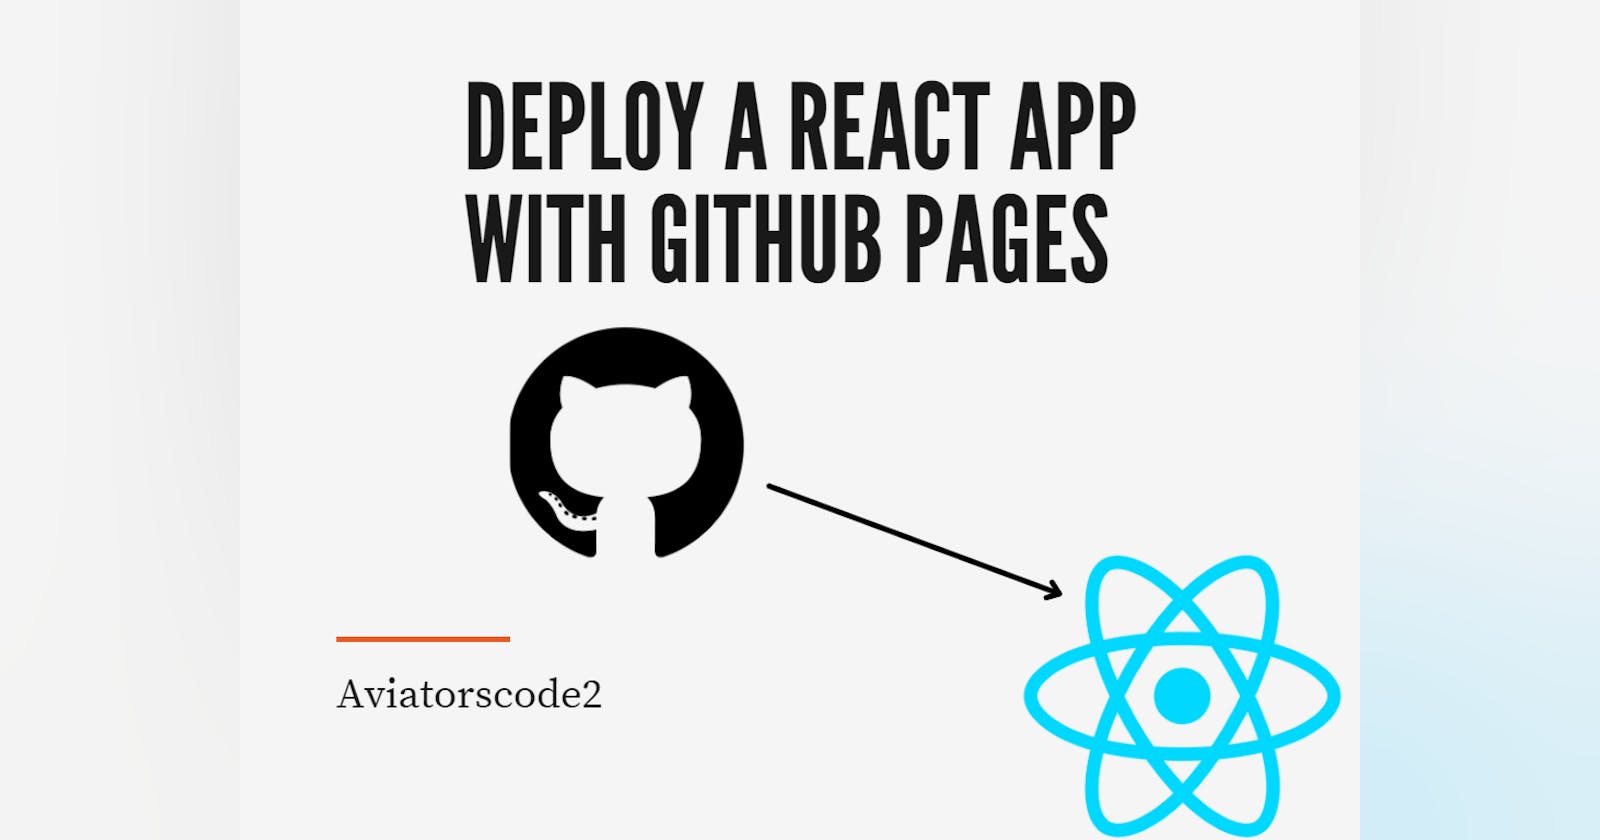 Deploying a React App using Github Pages